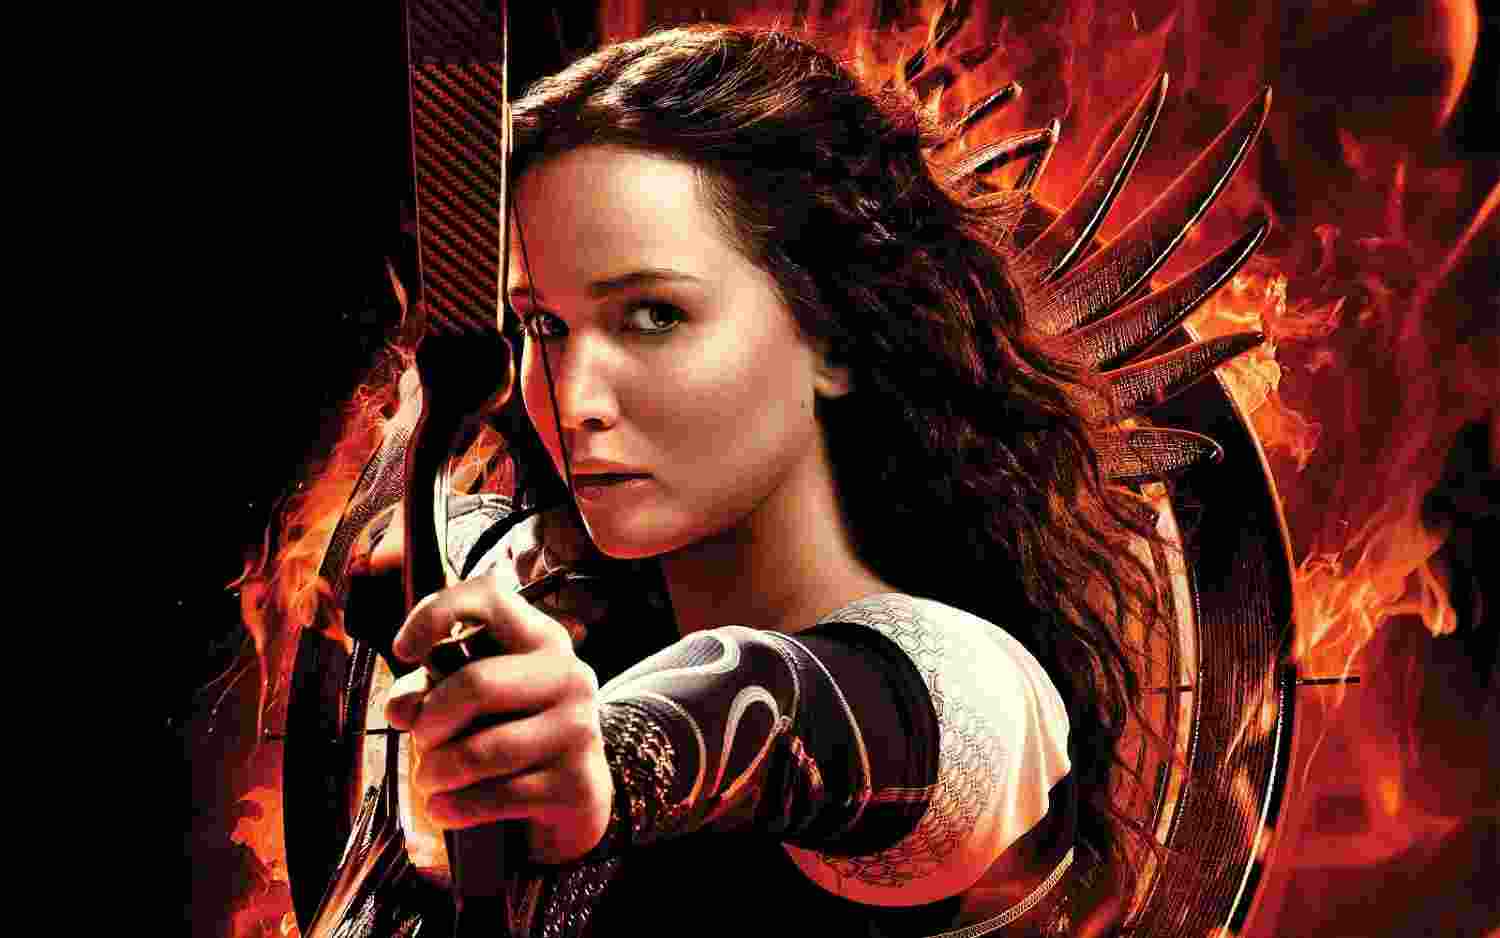 New 'Hunger Games' movie set for 2026 release